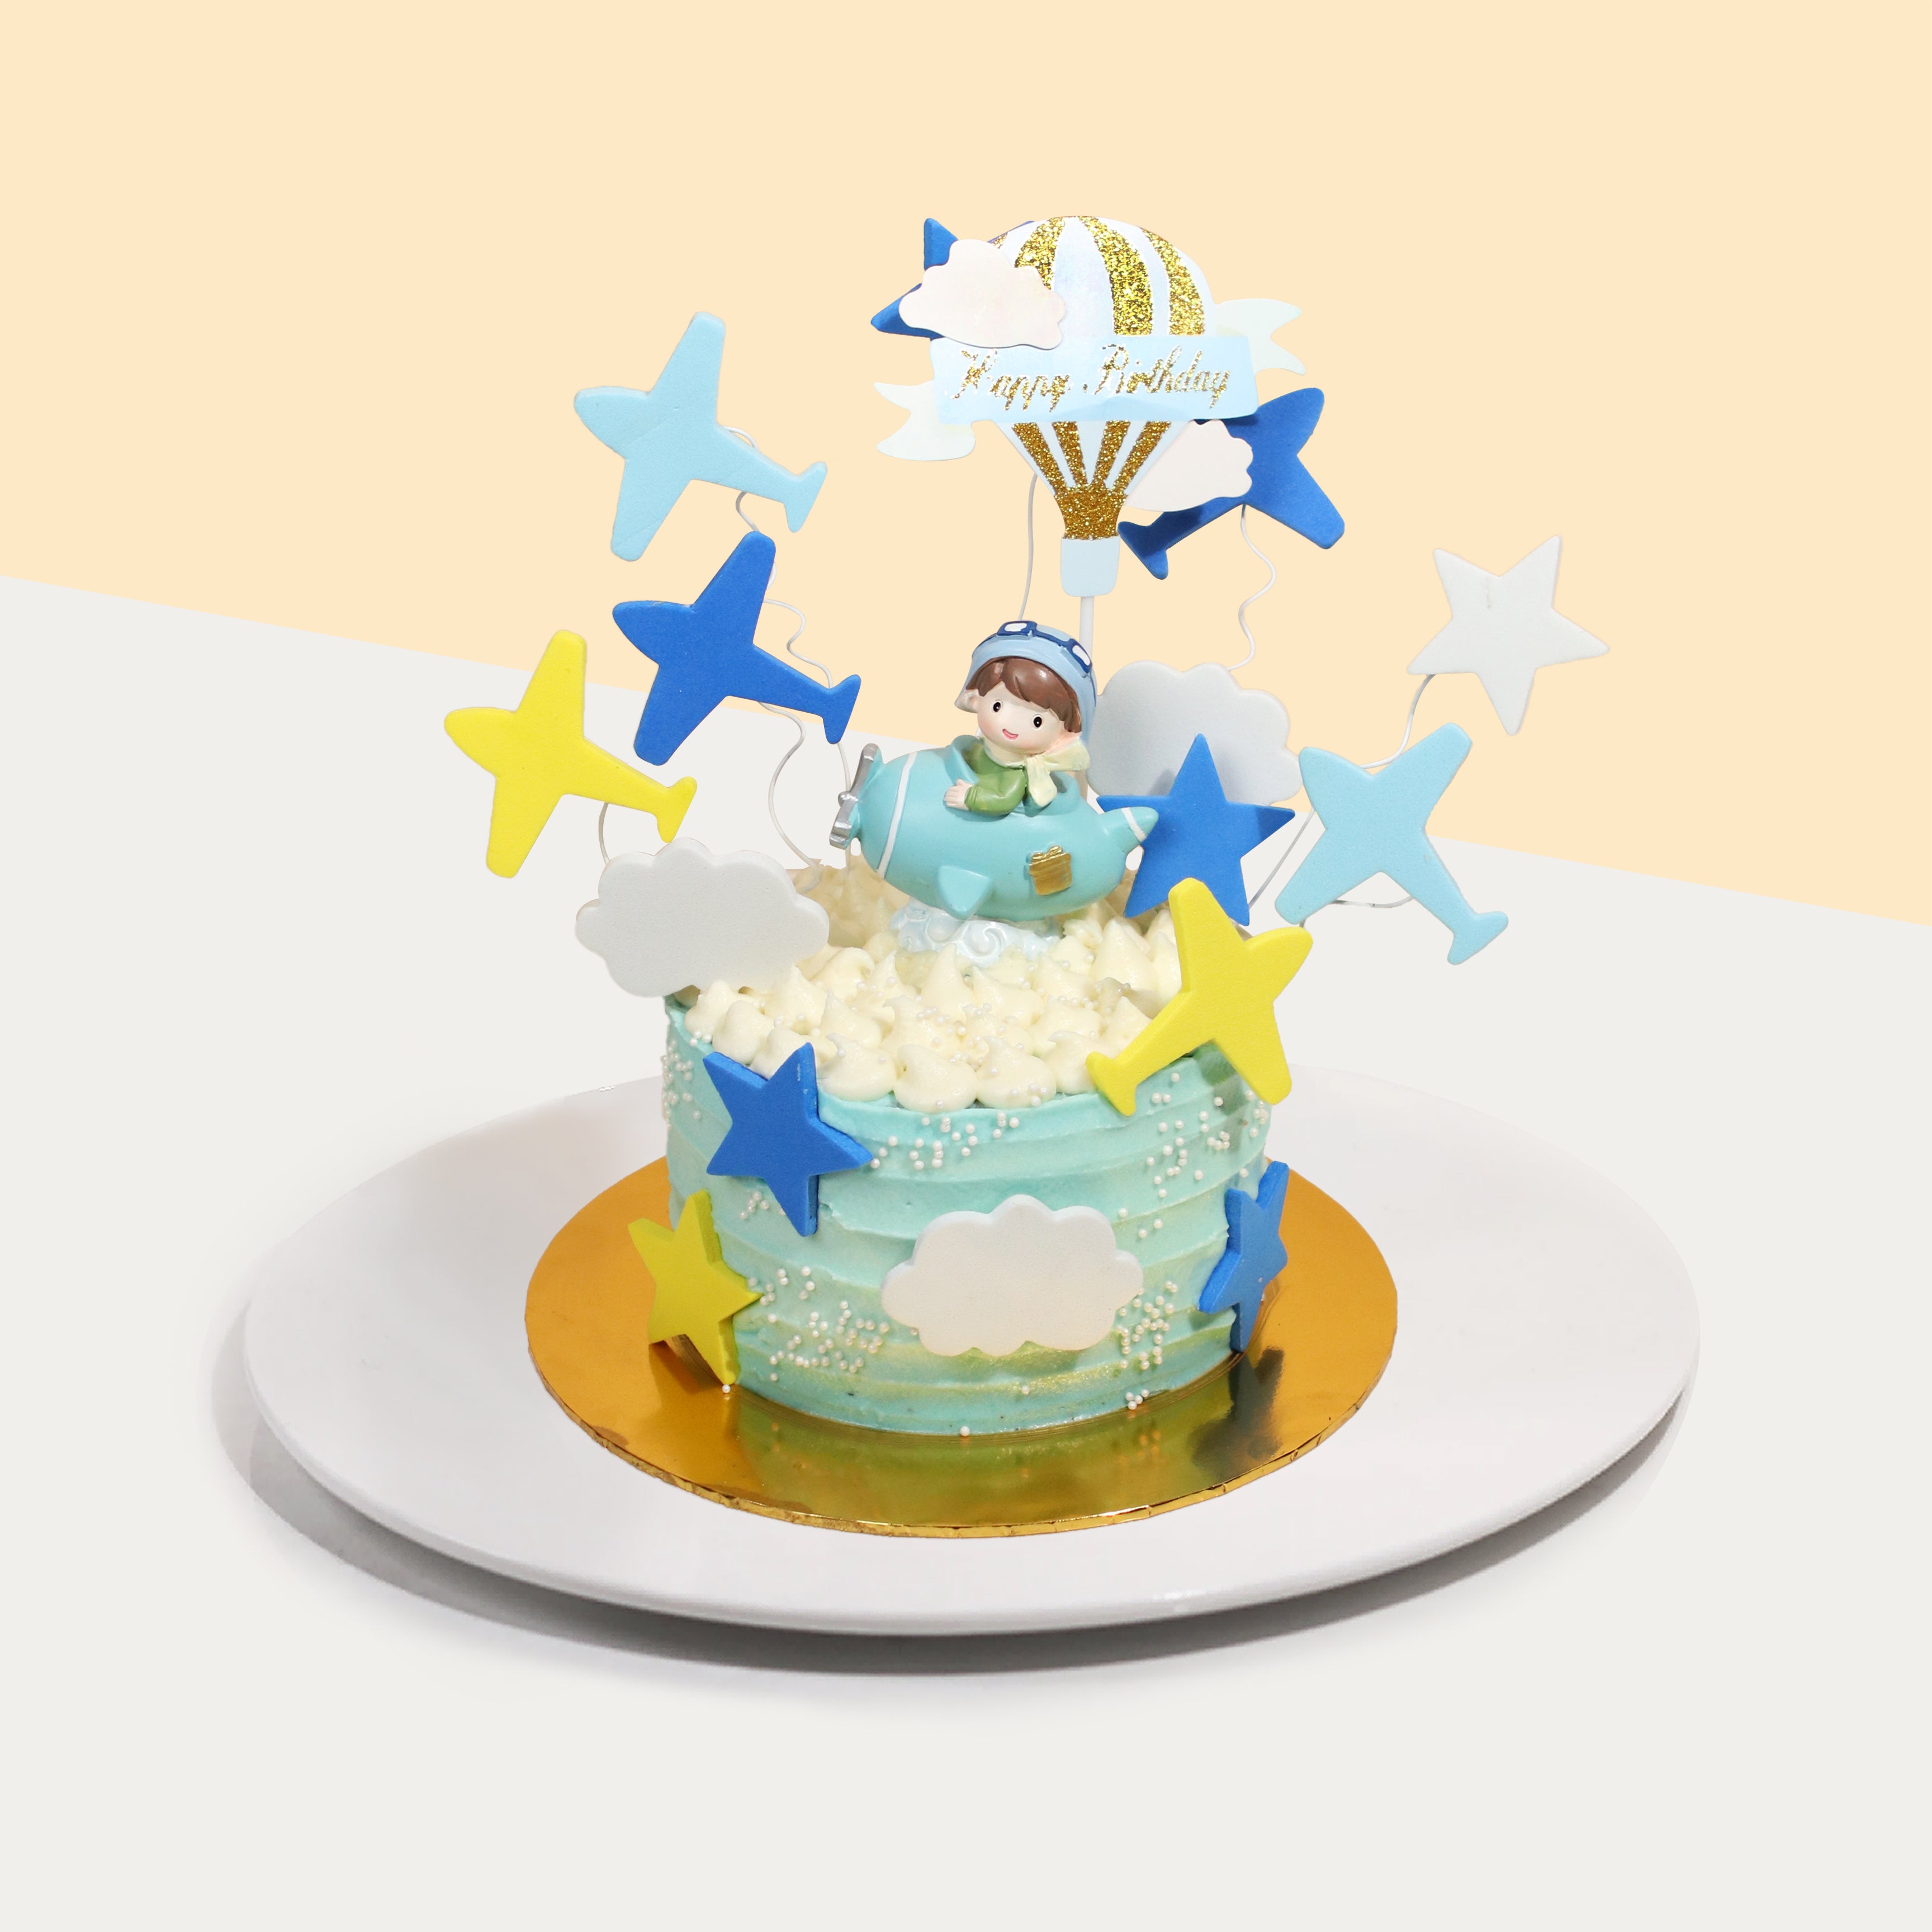 Cakes: High Flying Planes and Ruffles